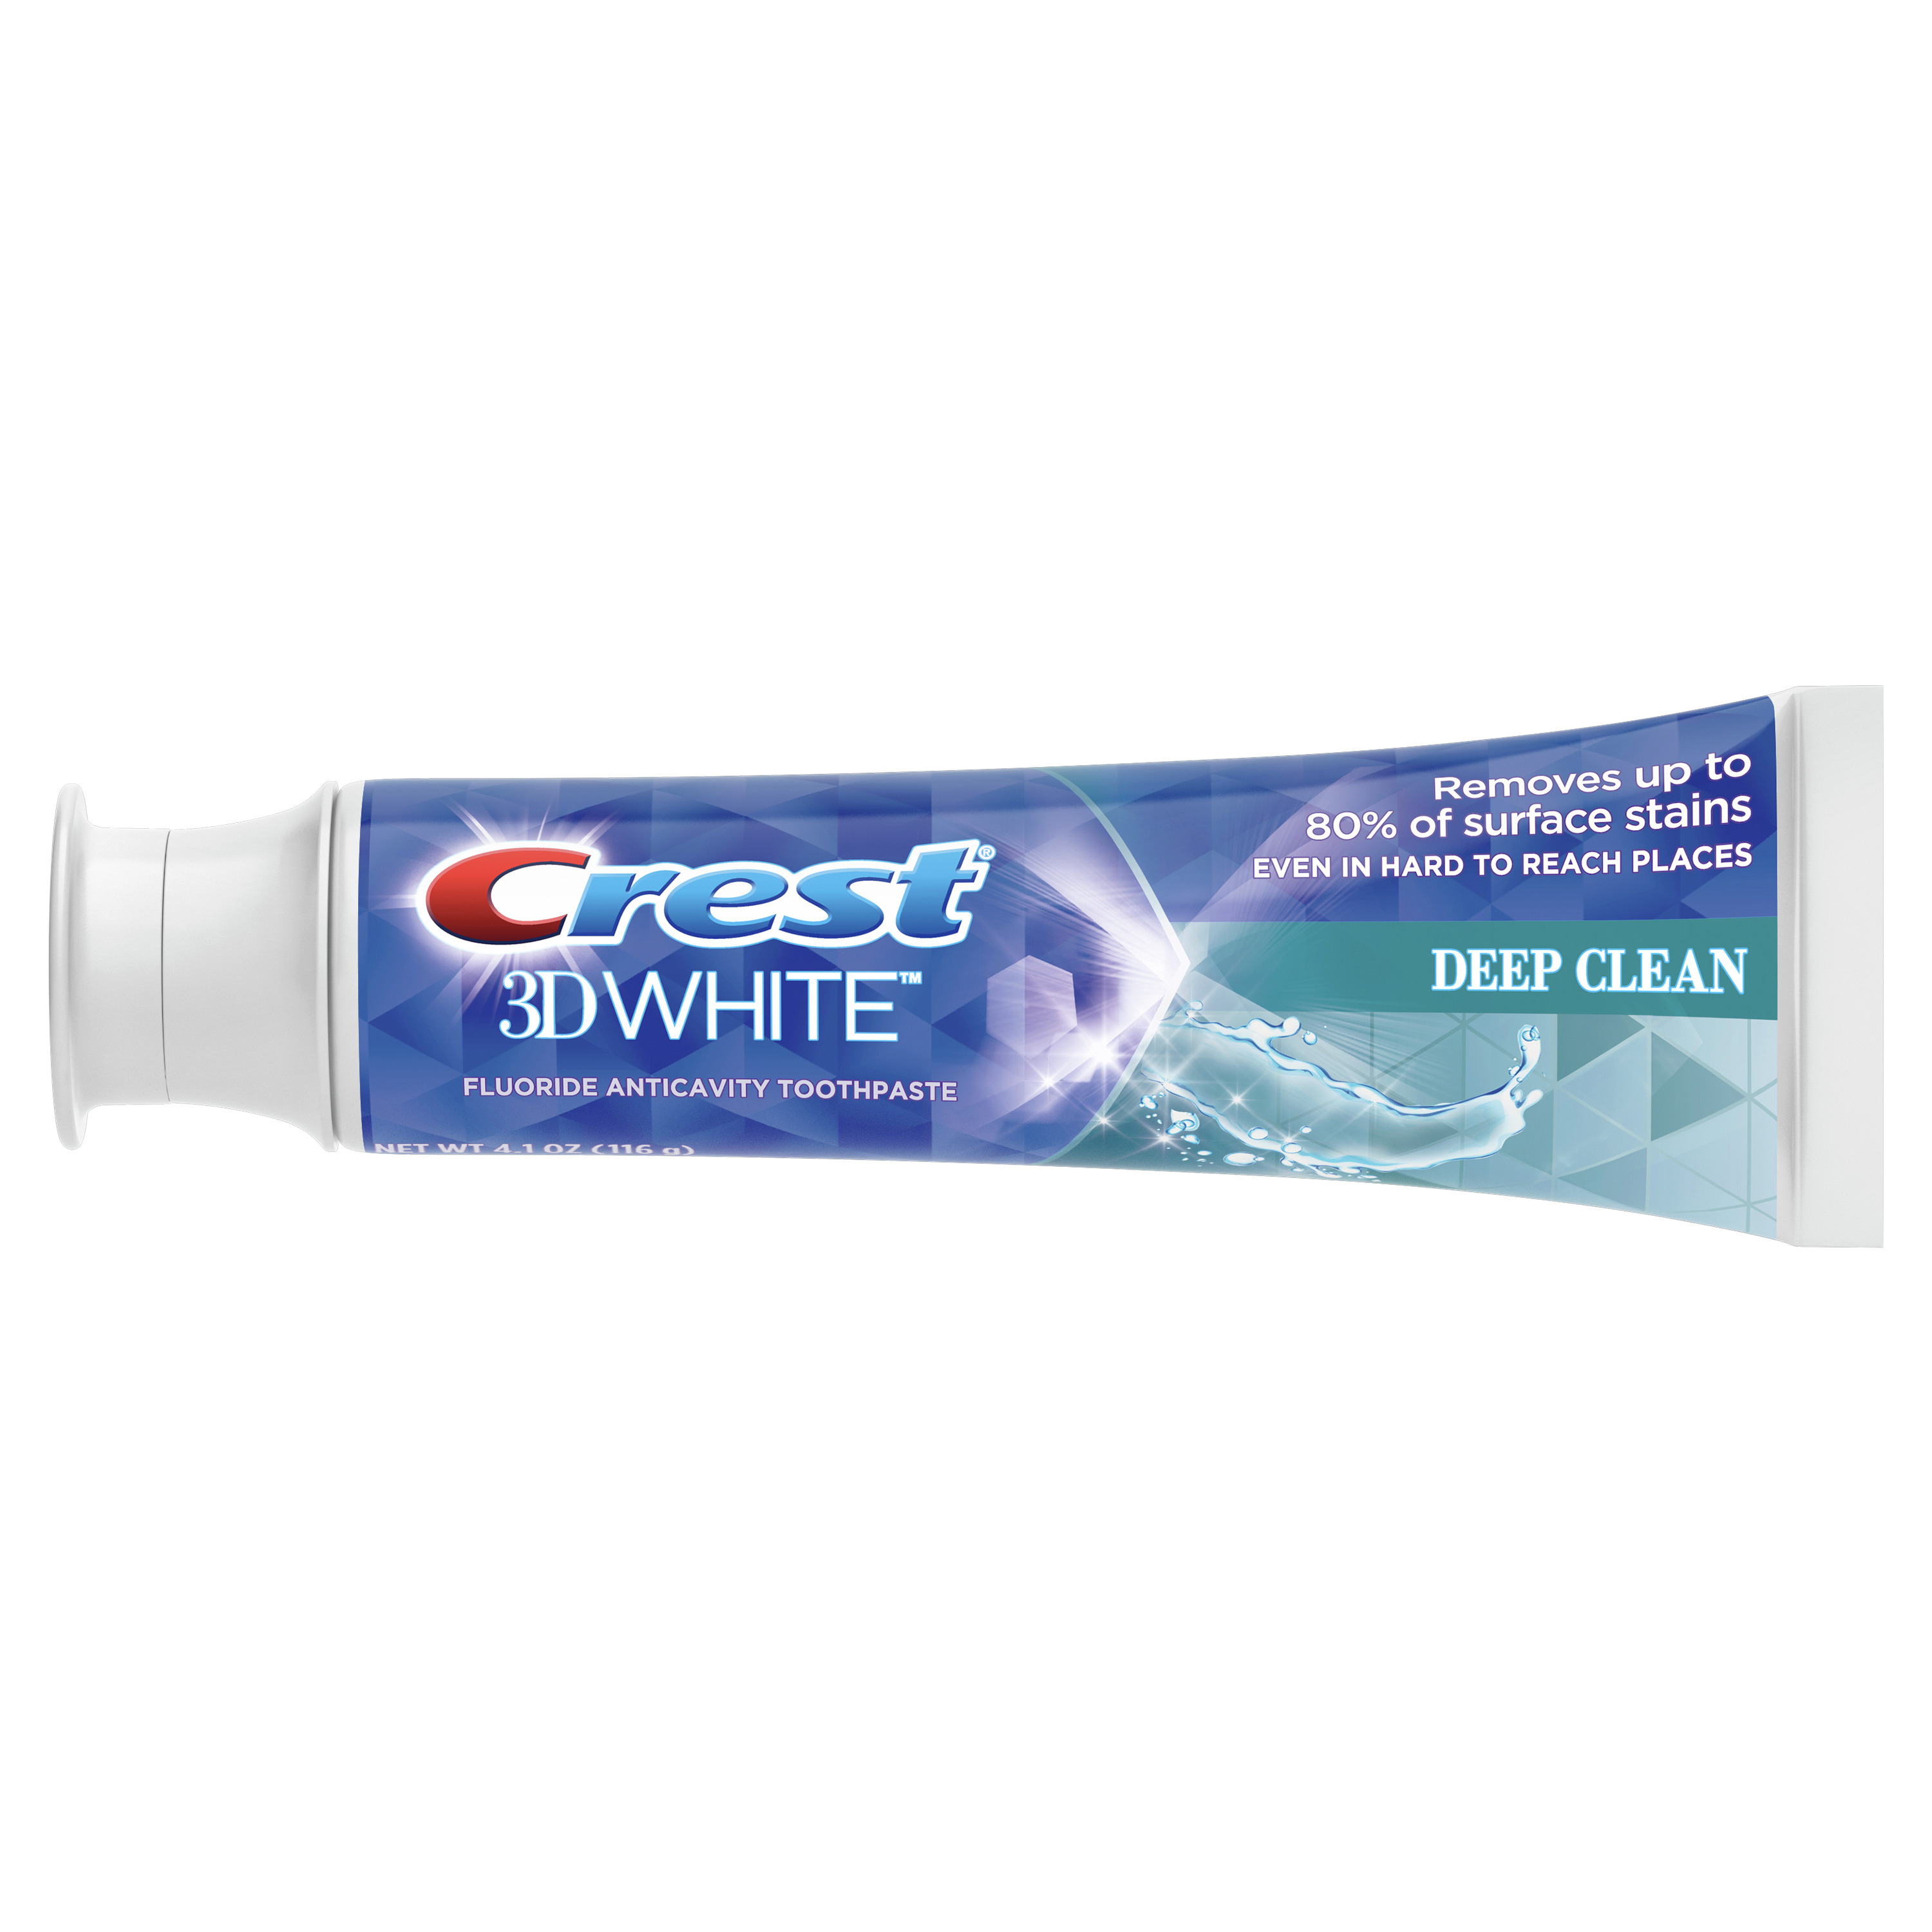 Crest 3D White, Whitening Toothpaste Deep Clean, 4.1 oz, Pack of 2 - image 3 of 5